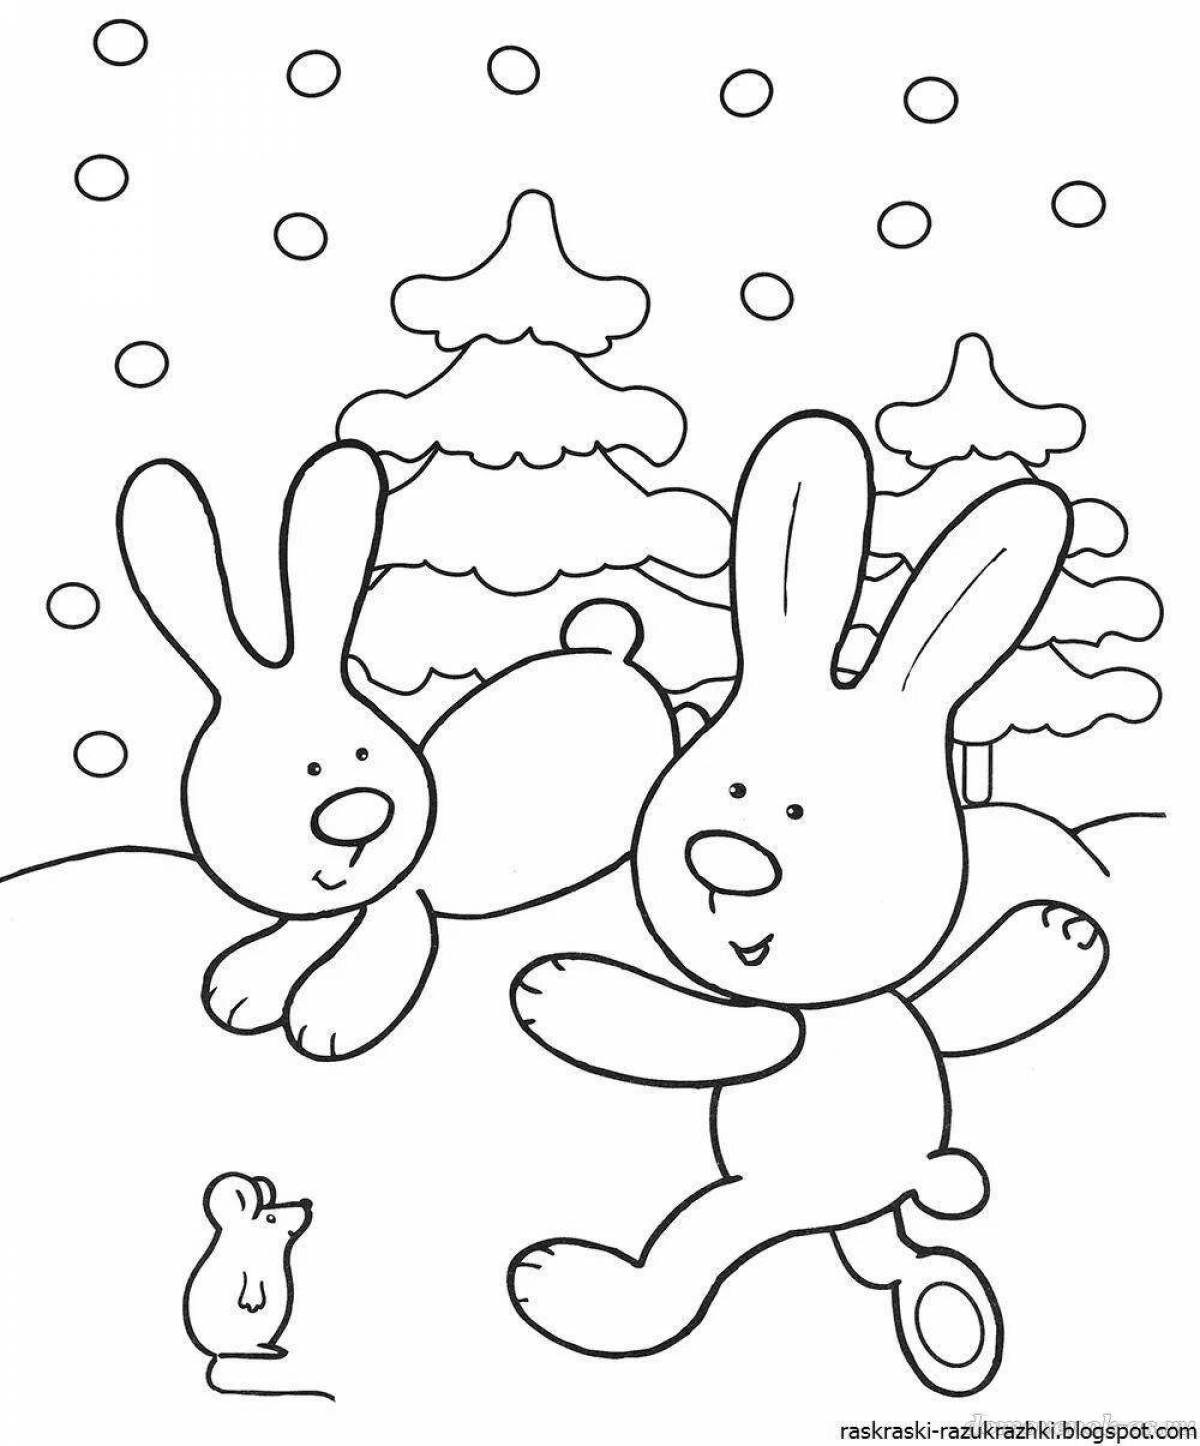 Magic winter coloring book for 2-3 year olds